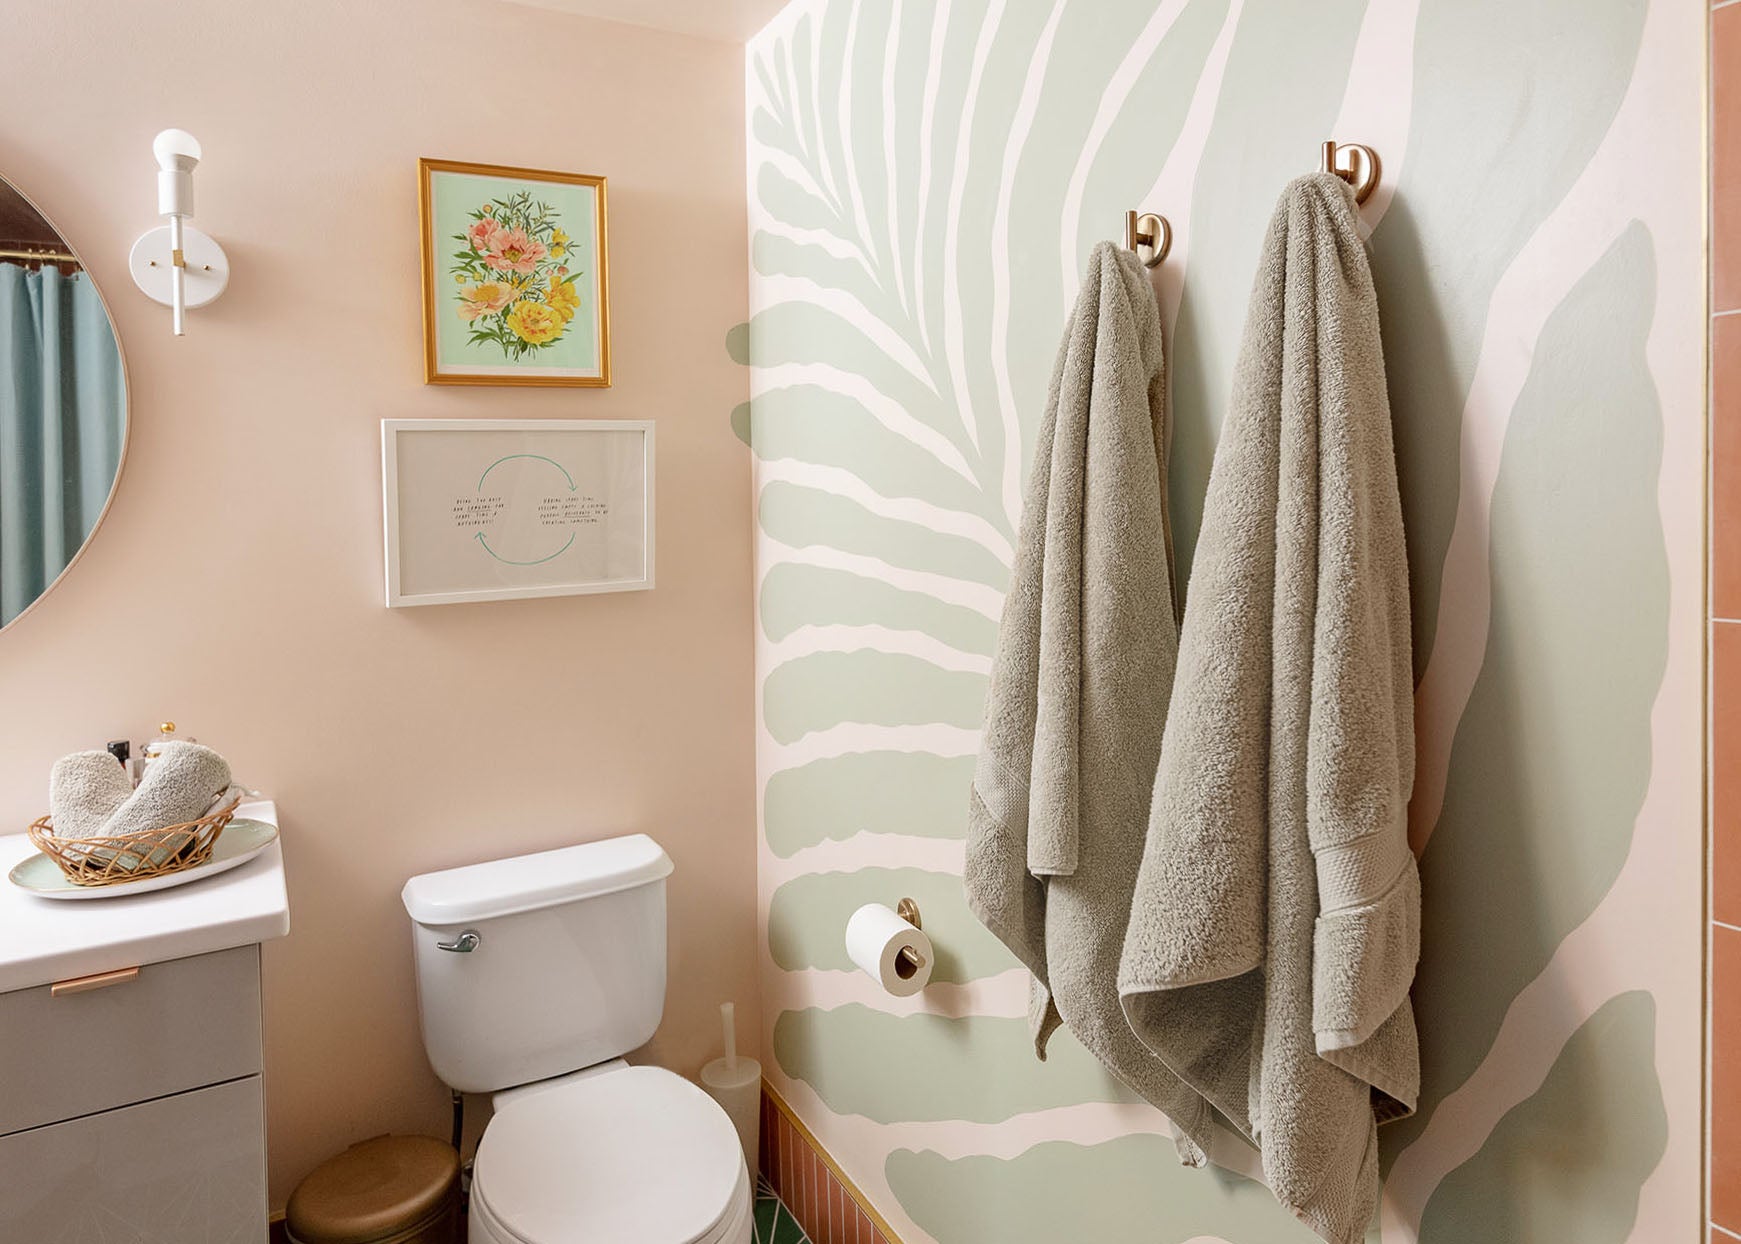 This bathroom went from dull to delightful, just by painting a wall mural.